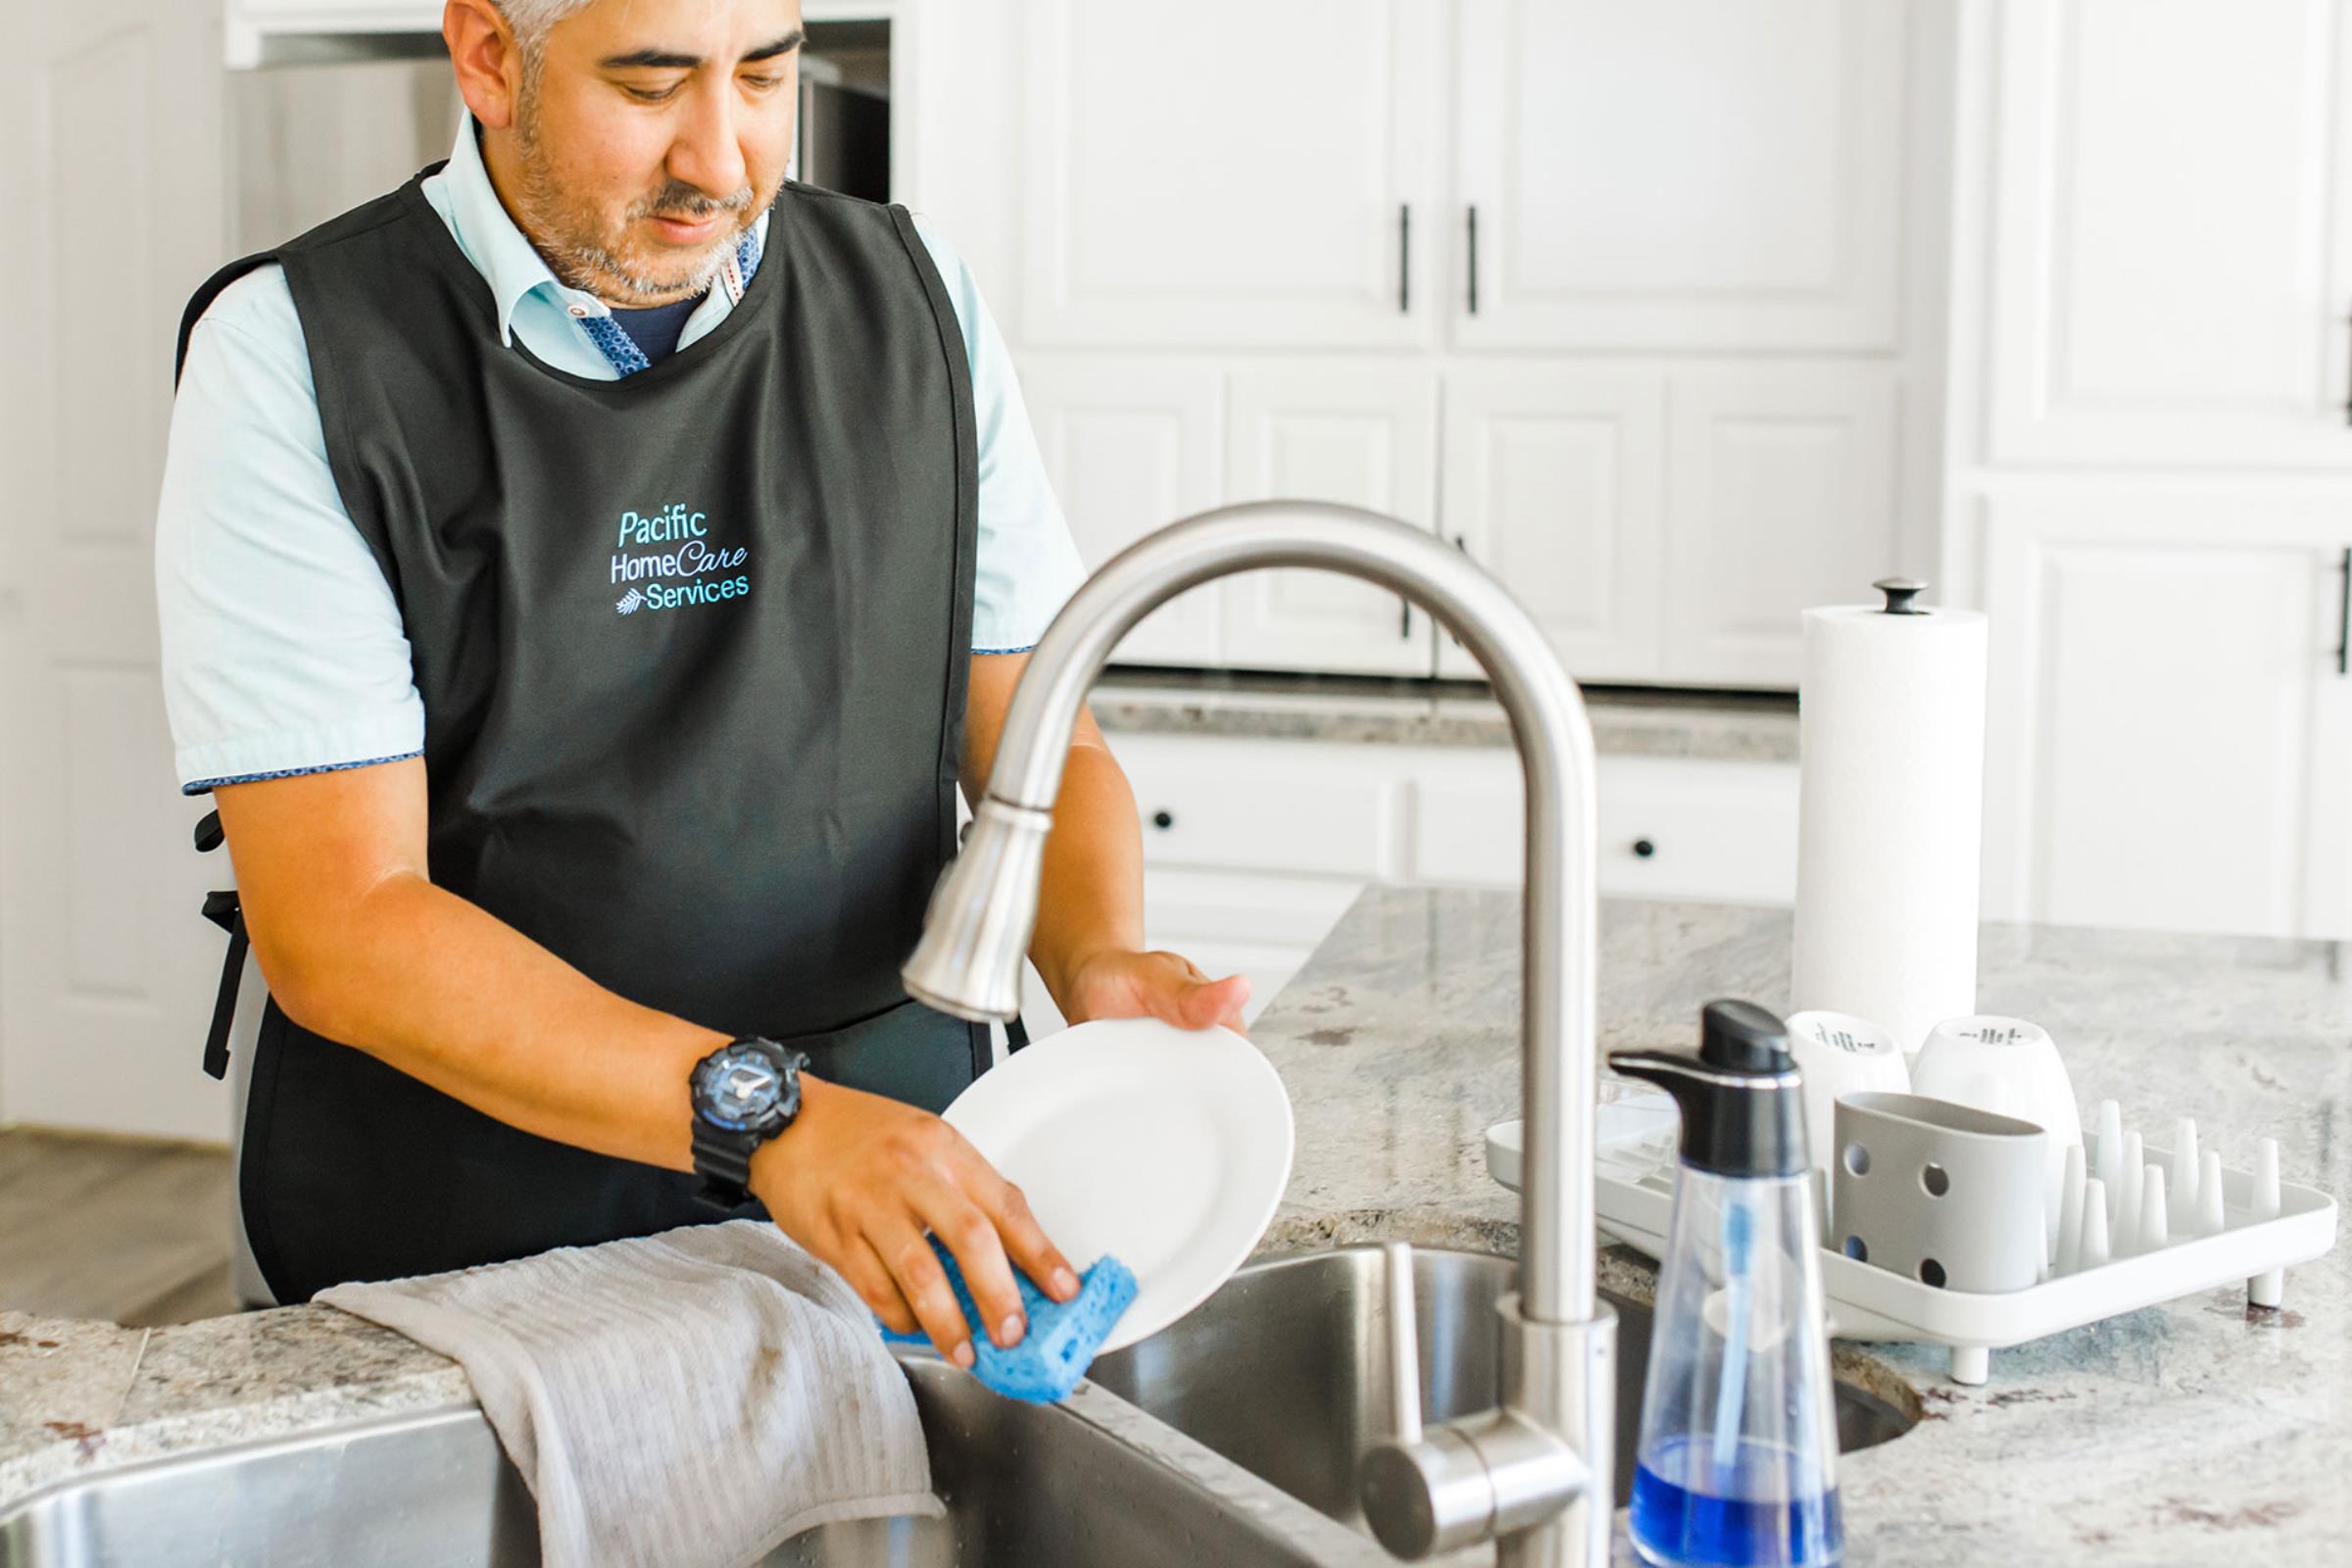 Male care provider washing dishes in sink